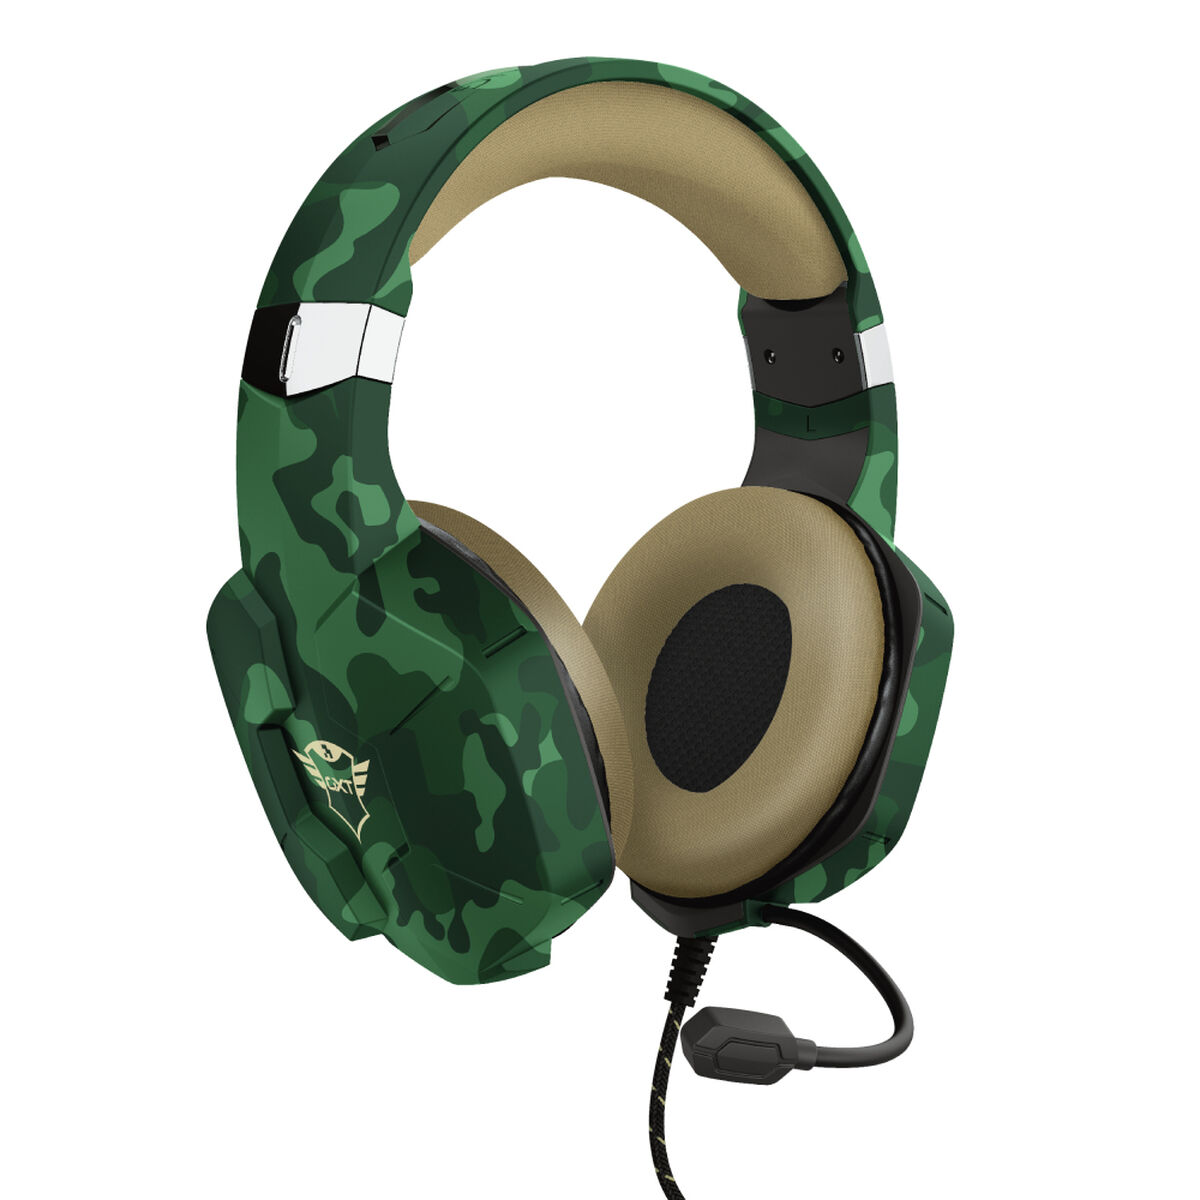 TRUST 24319 GXT323C CARUS GAMING Camouflage Grün Headset JUNGLE CAMO, In-ear Gaming